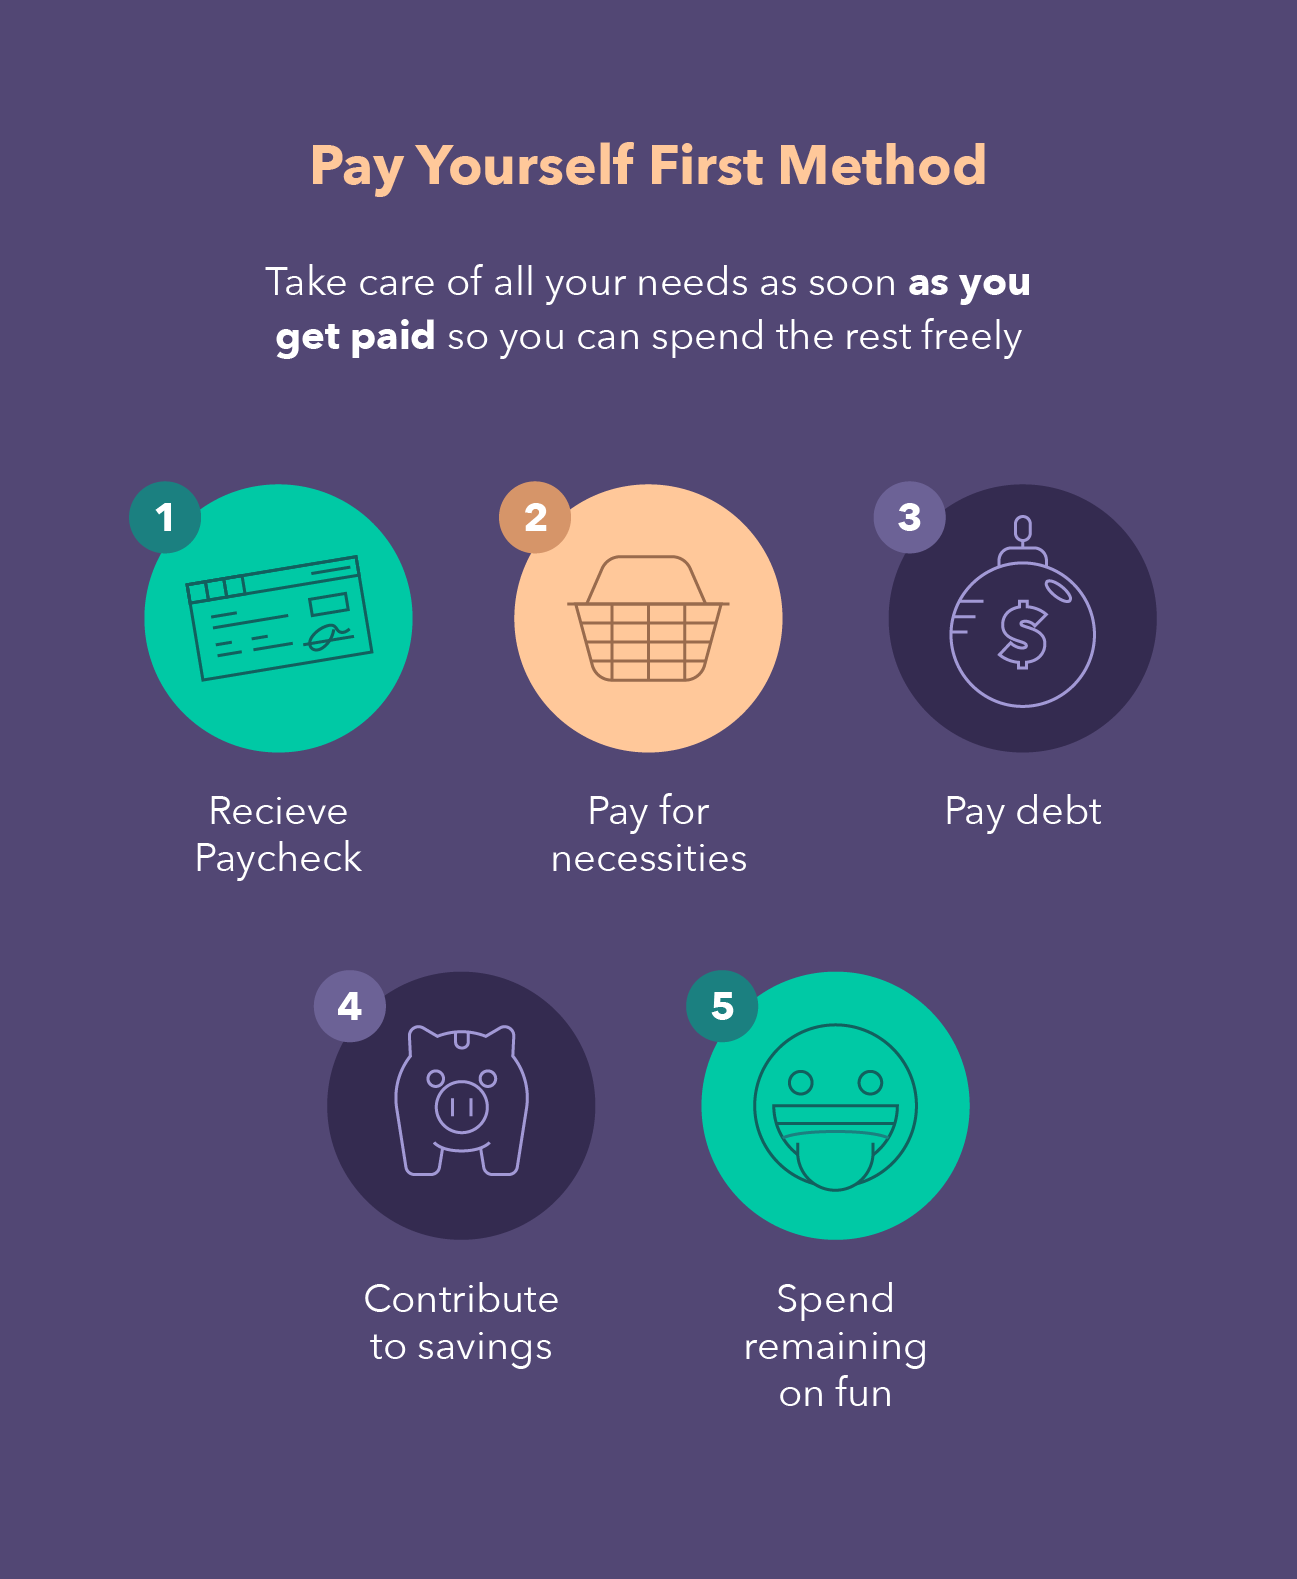 Illustrations help overview how to leverage the pay yourself first method for fun money, meaning pay for all your necessities immediately when you get paid and use the rest of your income as fun money.